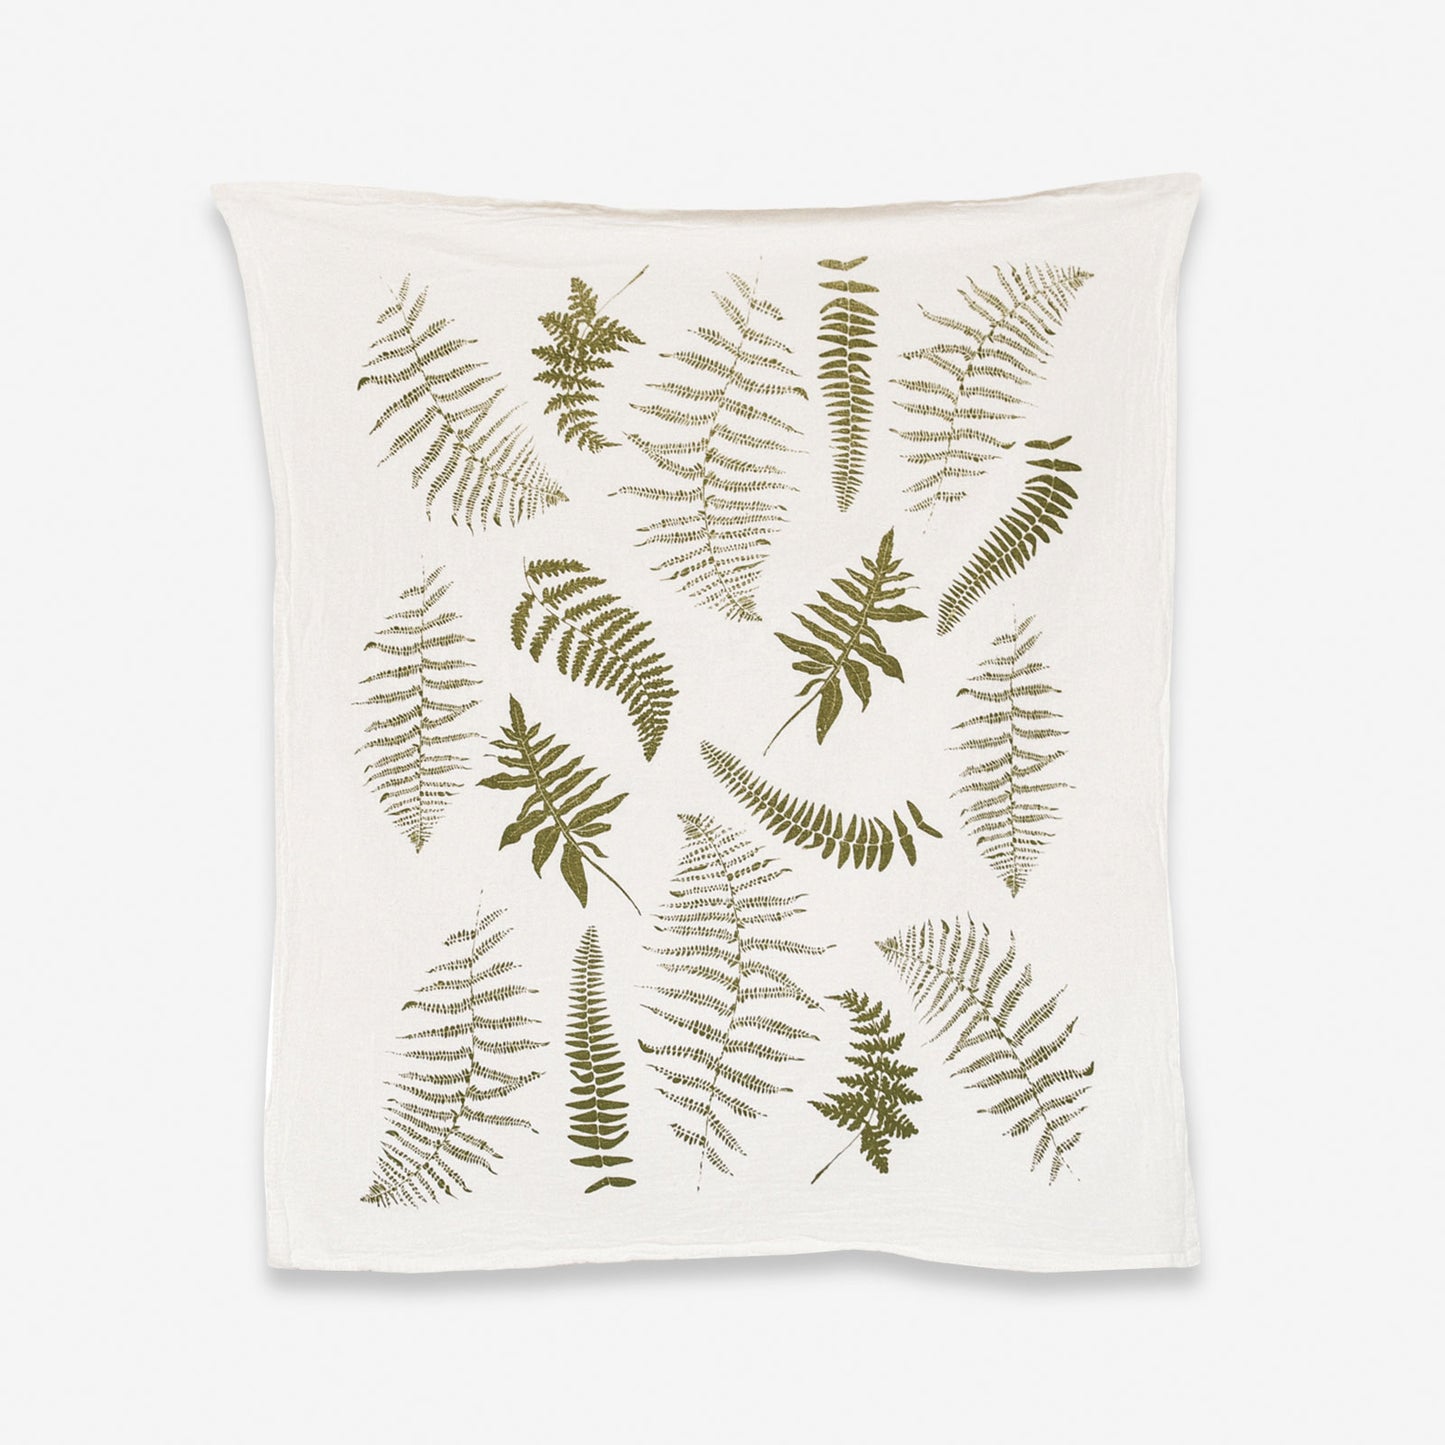 Rabbits with Ferns Needlepoint Pillow